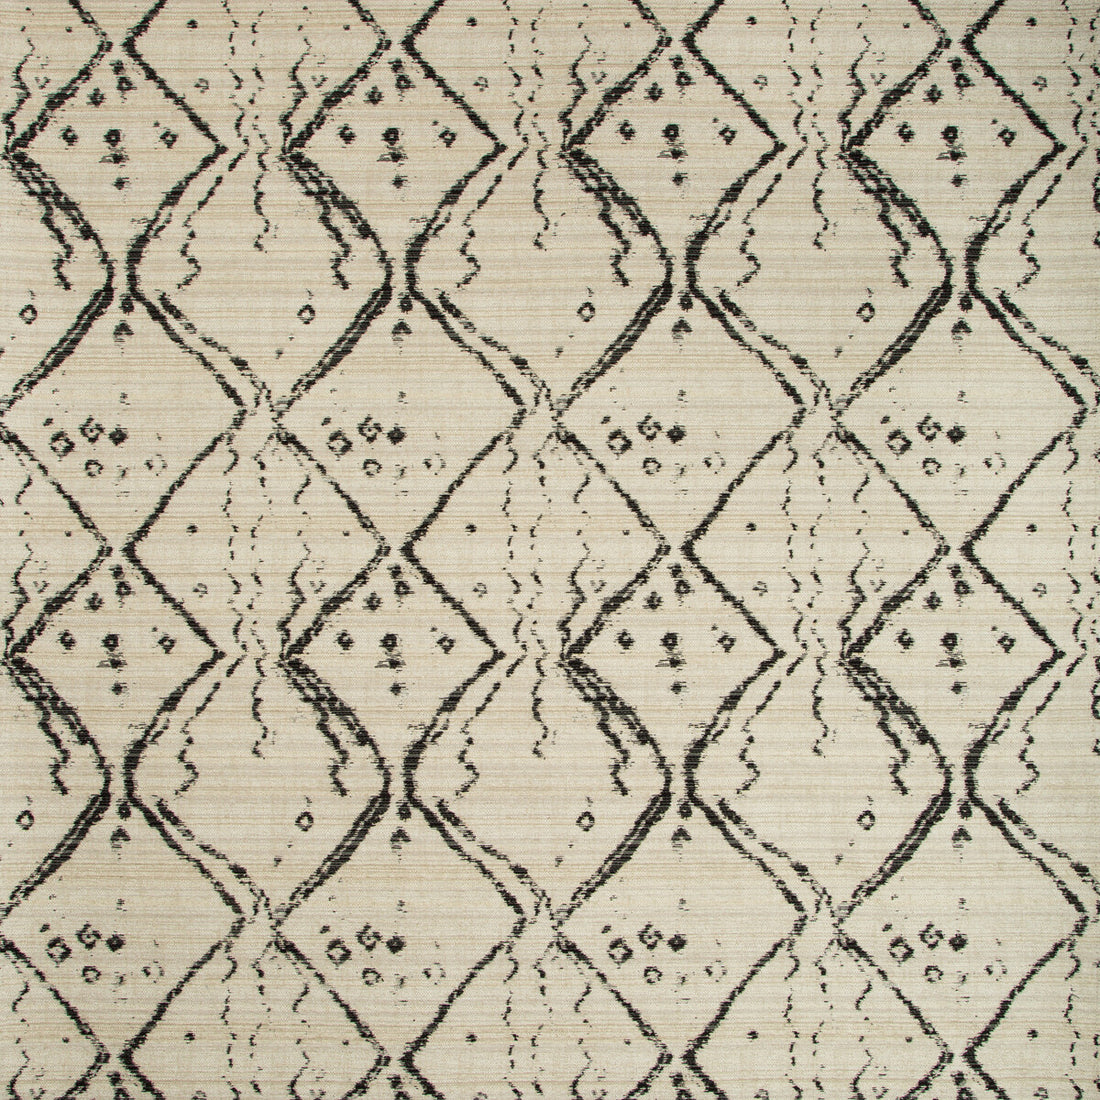 Globe Trot fabric in nero color - pattern 34948.81.0 - by Kravet Design in the Nate Berkus Well-Traveled collection